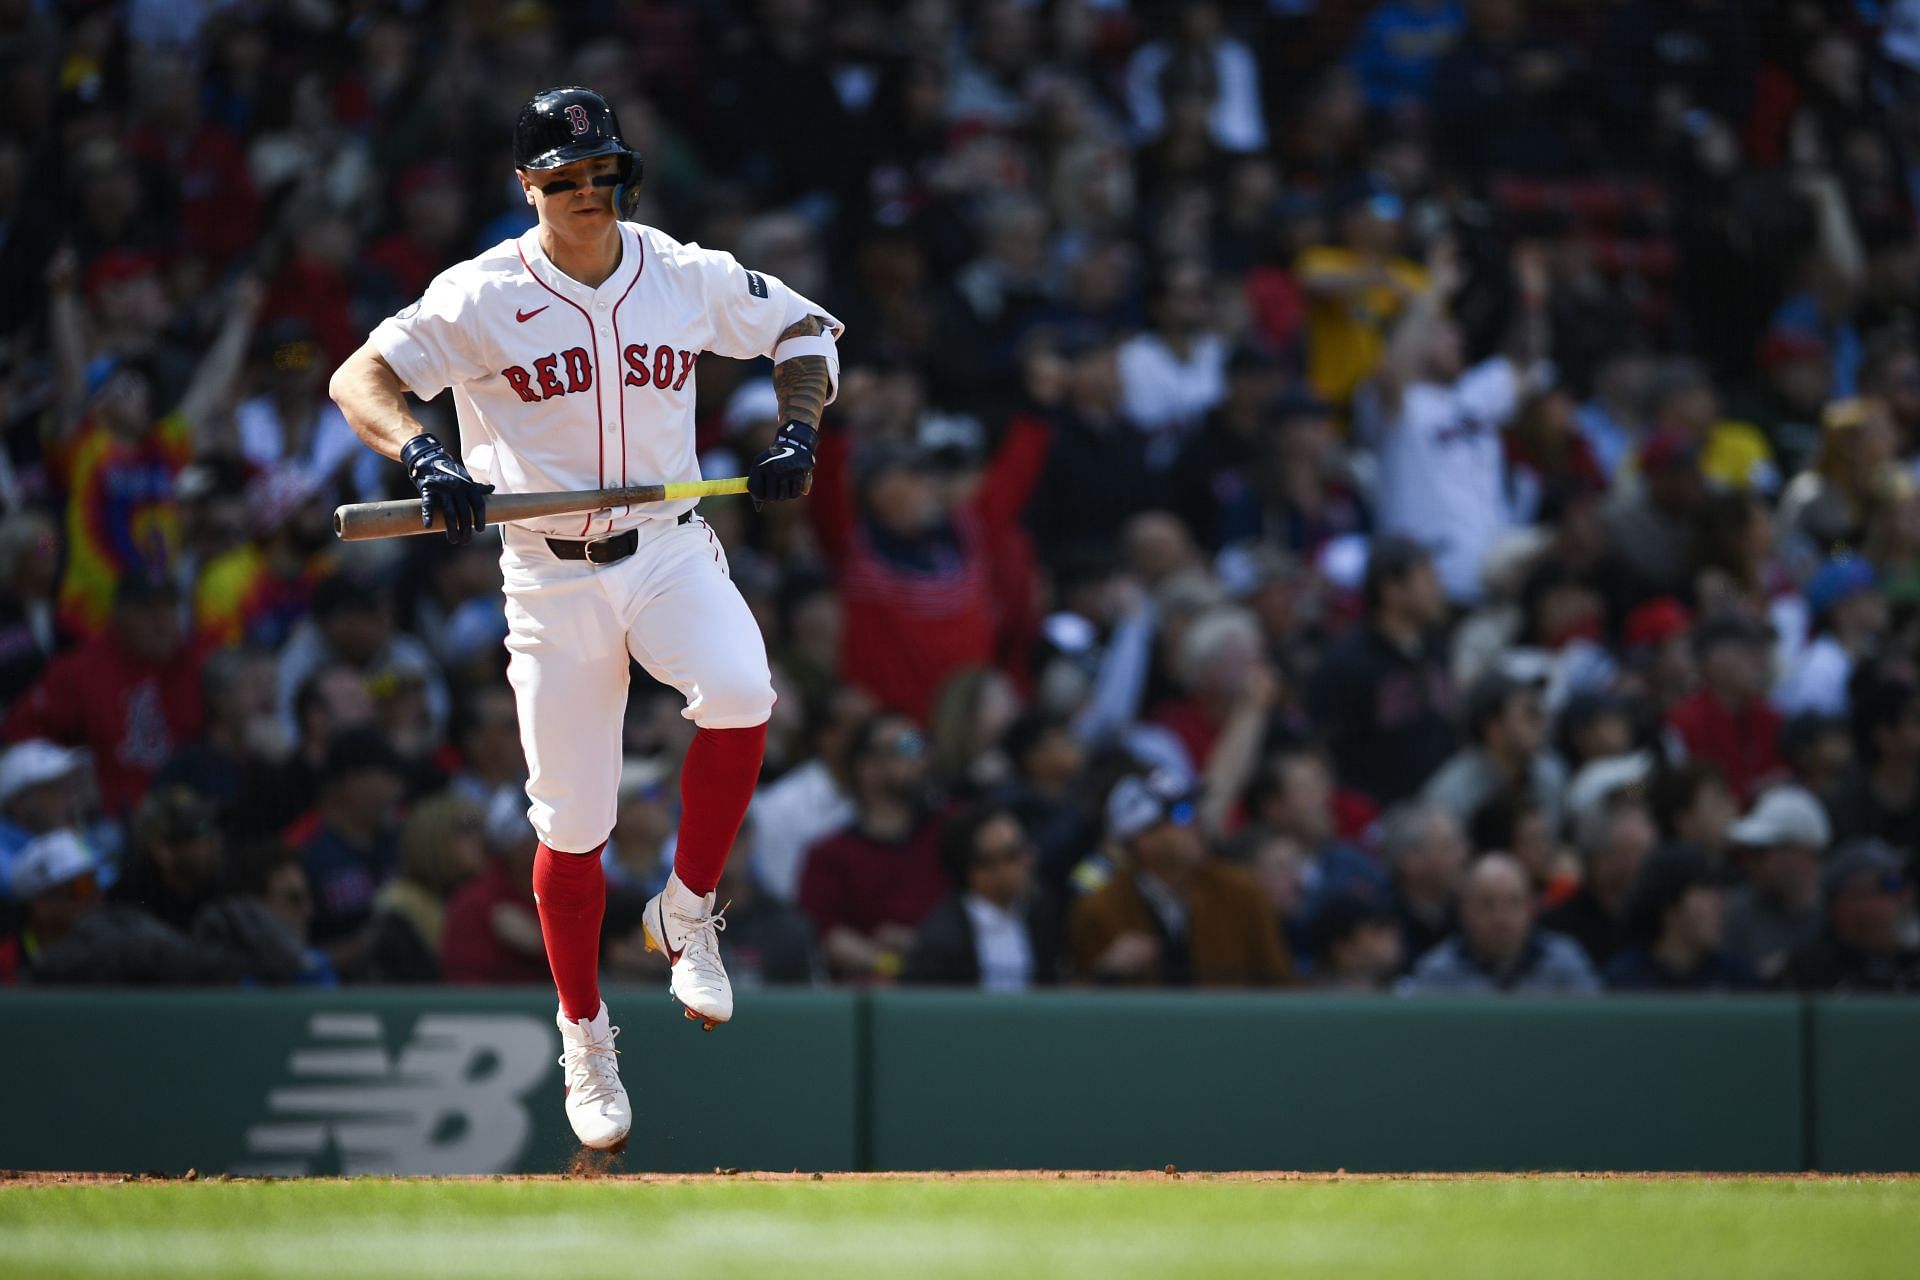 The Boston Red Sox fell to 9-8 today